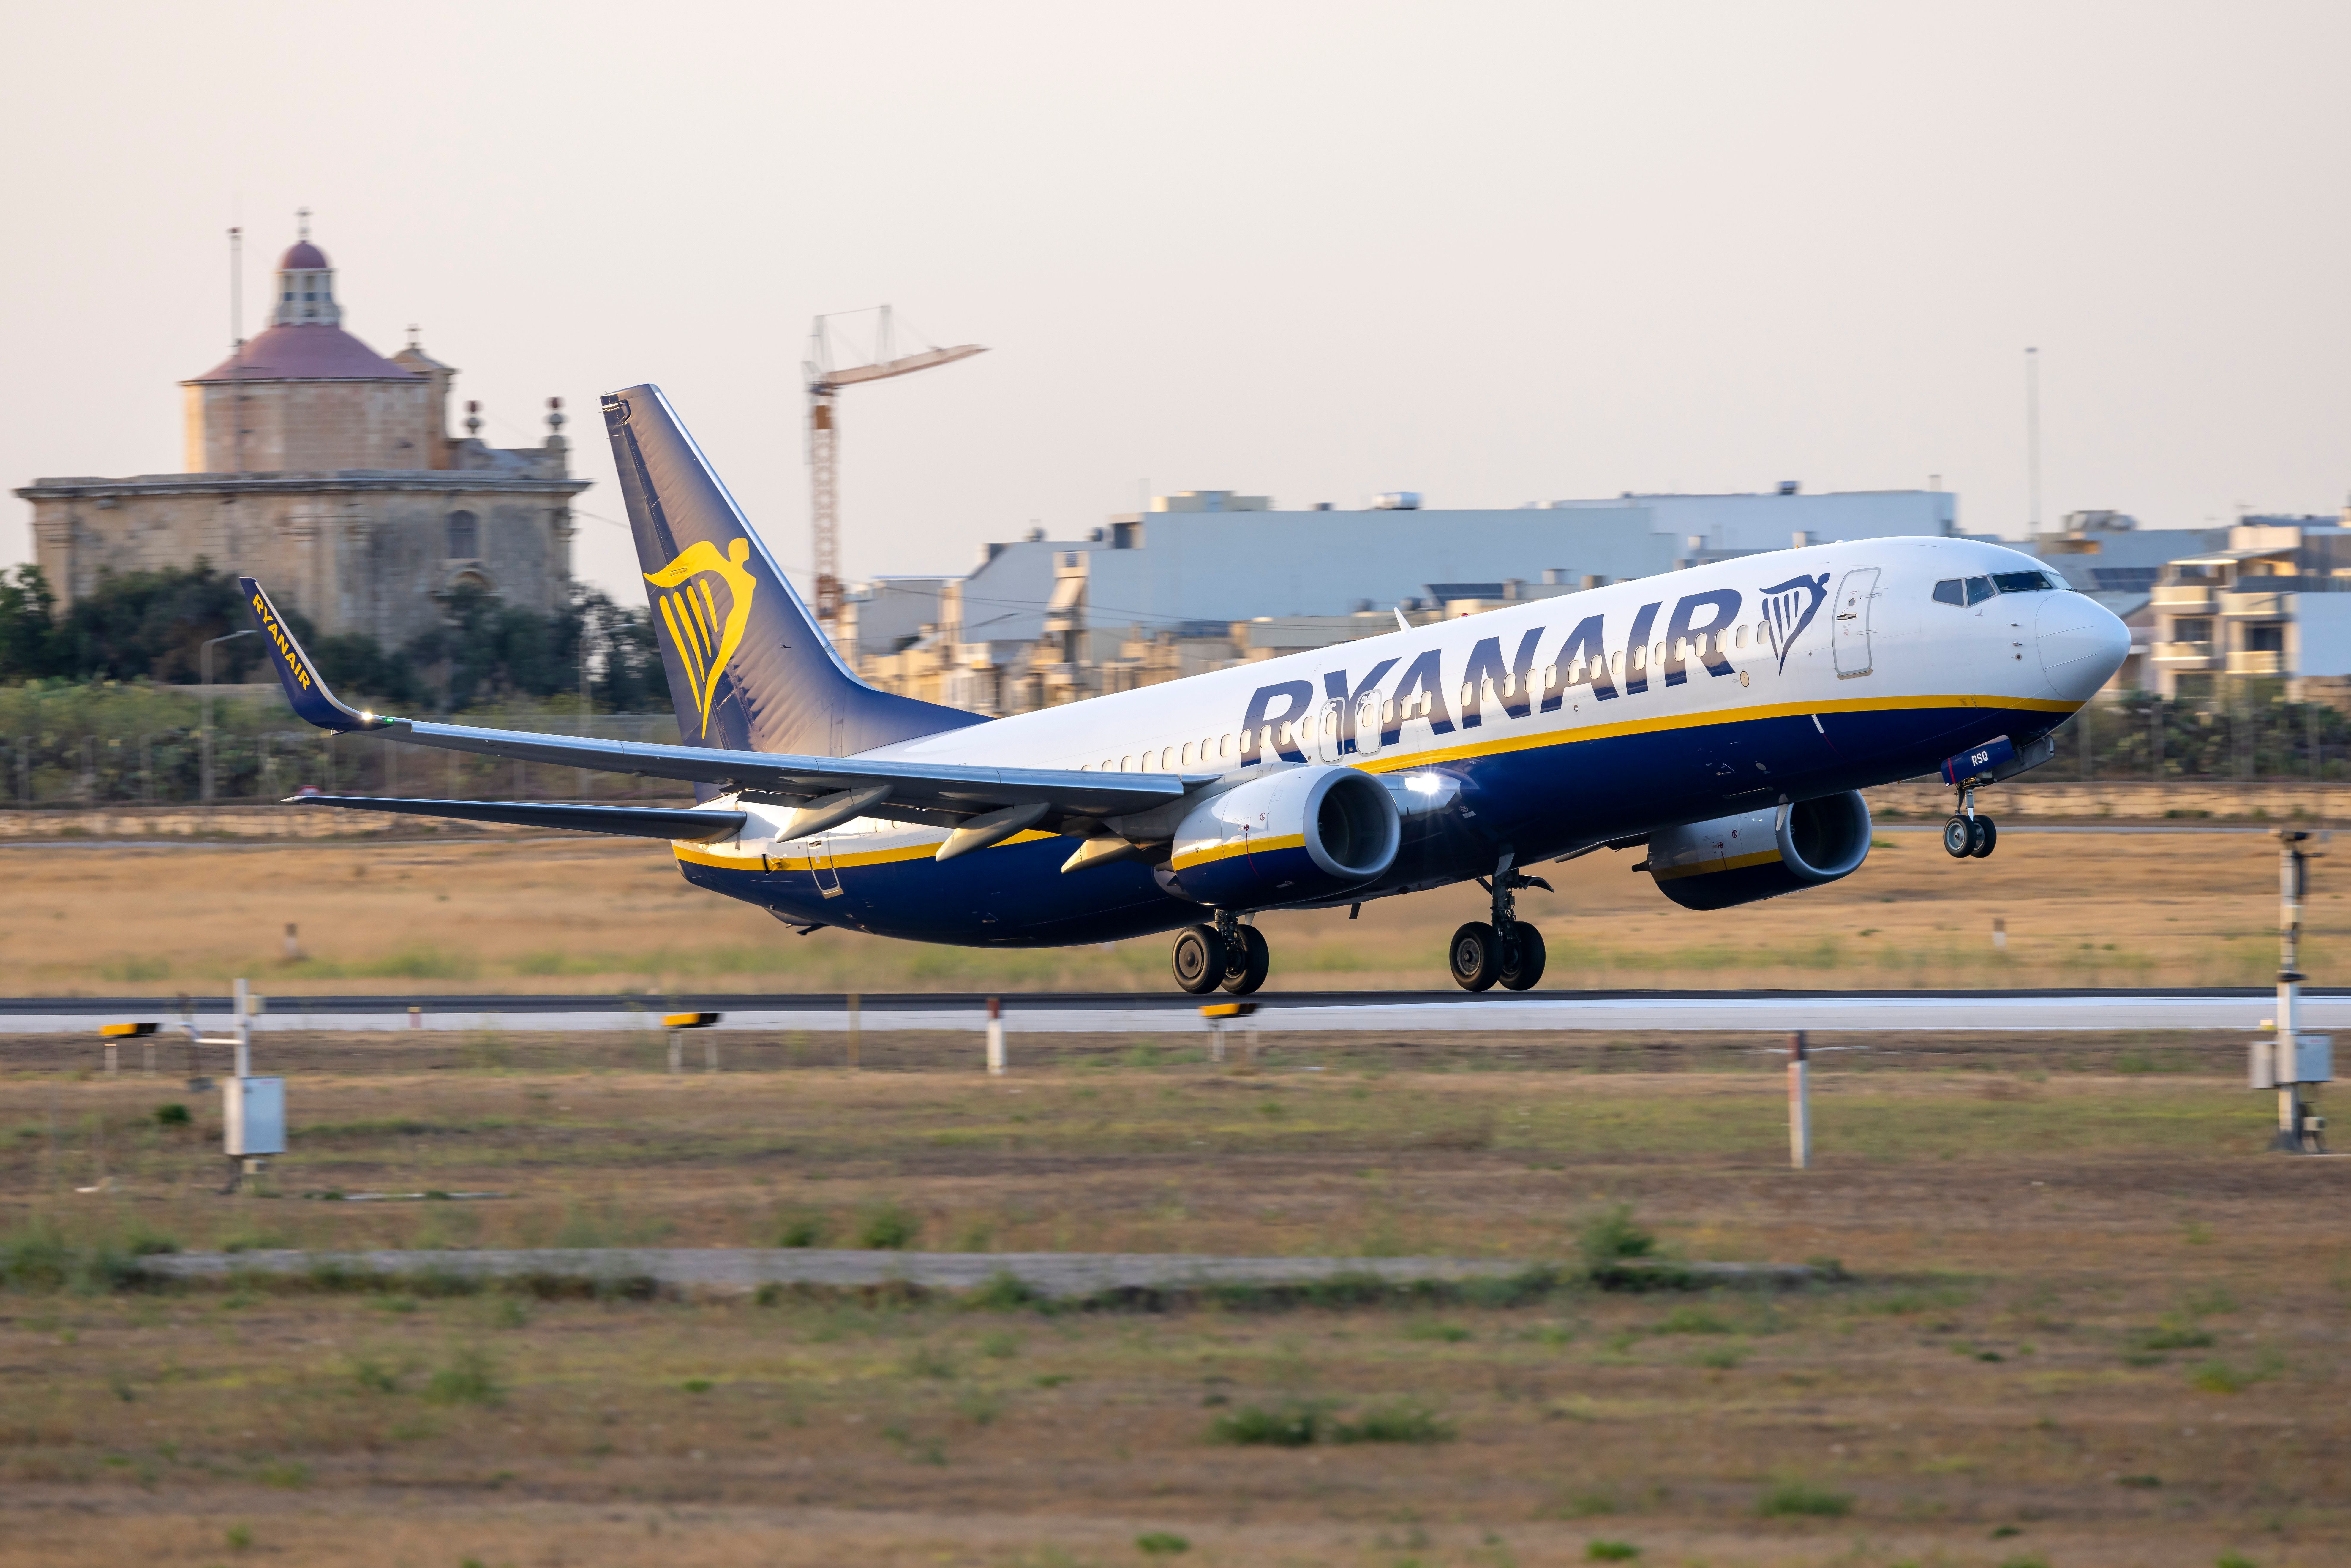 A Ryanair Boeing 737-800 Taking Off From Malta.